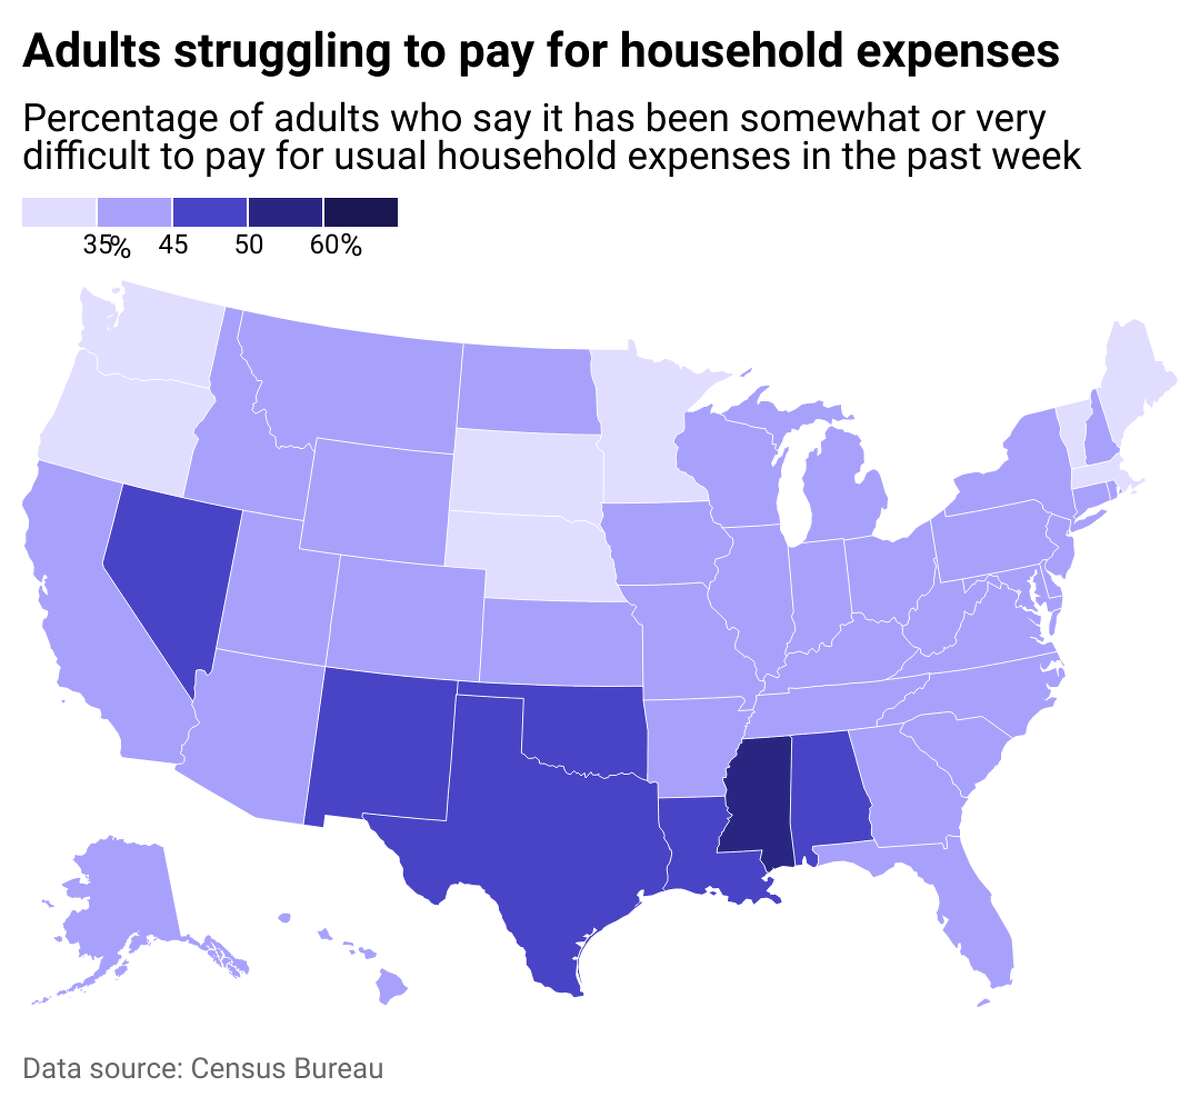 National outlook: Southern states are among those struggling the most More Americans living in Southern states, including Mississippi, Alabama, Louisiana, and Texas, as well as Nevada and New Mexico, struggled to afford regular expenses the most, according to the Census Bureau's latest survey. Consumers in the Washington, D.C., Oregon, Nebraska, and Minnesota showed the most resilience in their ability to afford rising costs than anywhere else.